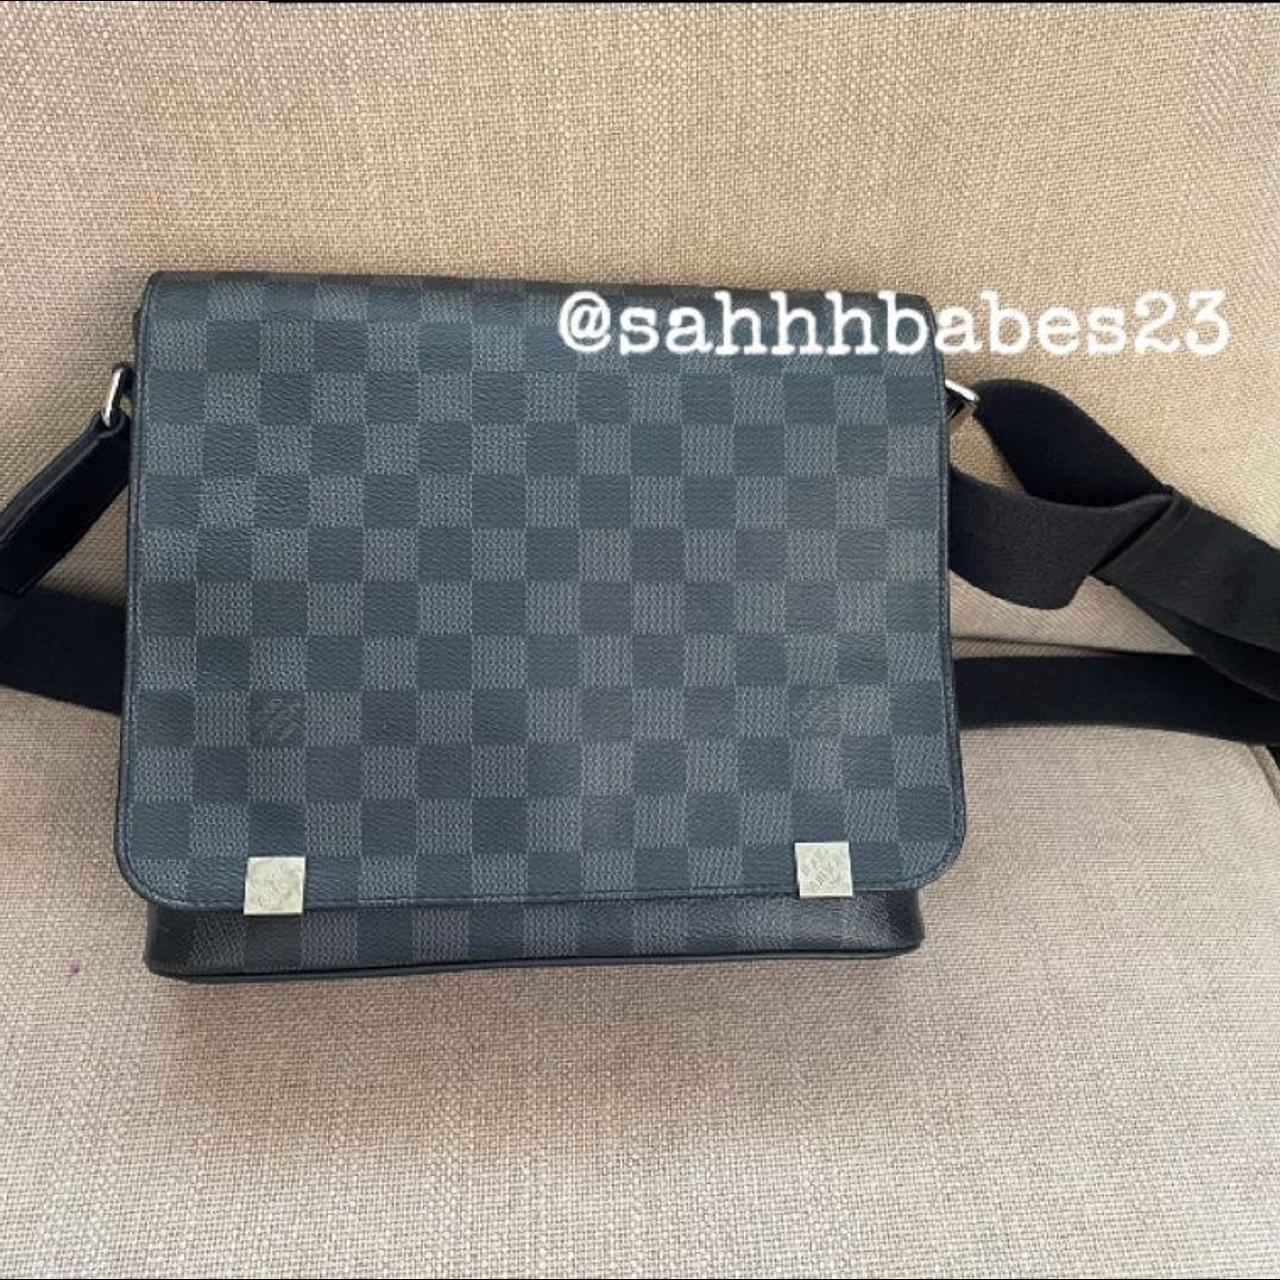 Louis Vuitton Damier Infini Leather Avenue Sling Bag (TOP QUALITY, 1:1  Reps, REAL LEATHER) from Suplook (Pls Contact Whatsapp at +8618559333945 to  make an order or check details. Wholesale and retail worldwide.) 